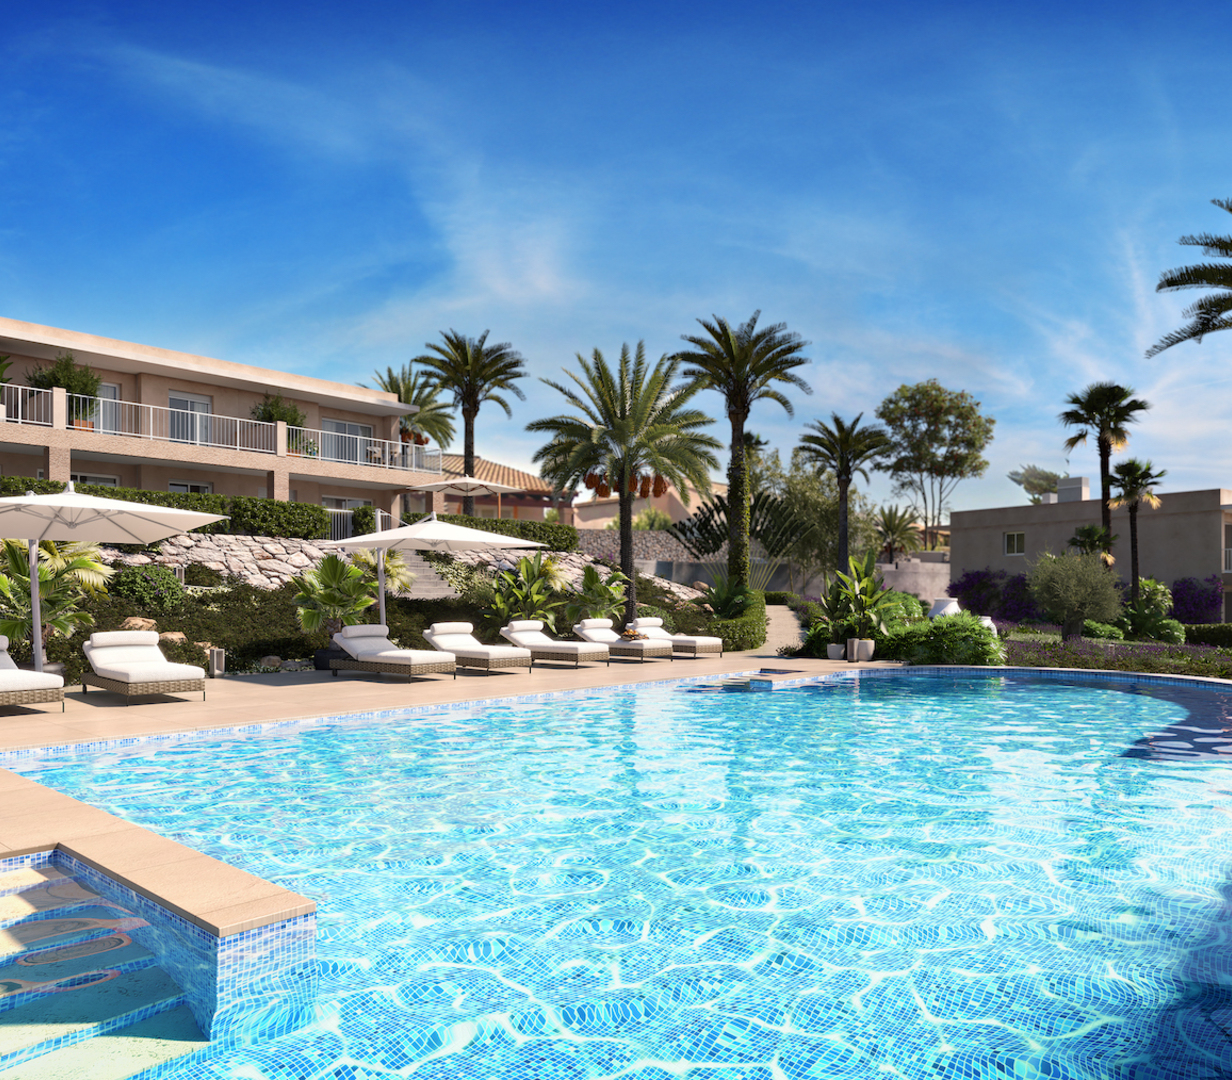 Apartments by the sea in the charming bay of Cala Anguila on the island of Mallorca